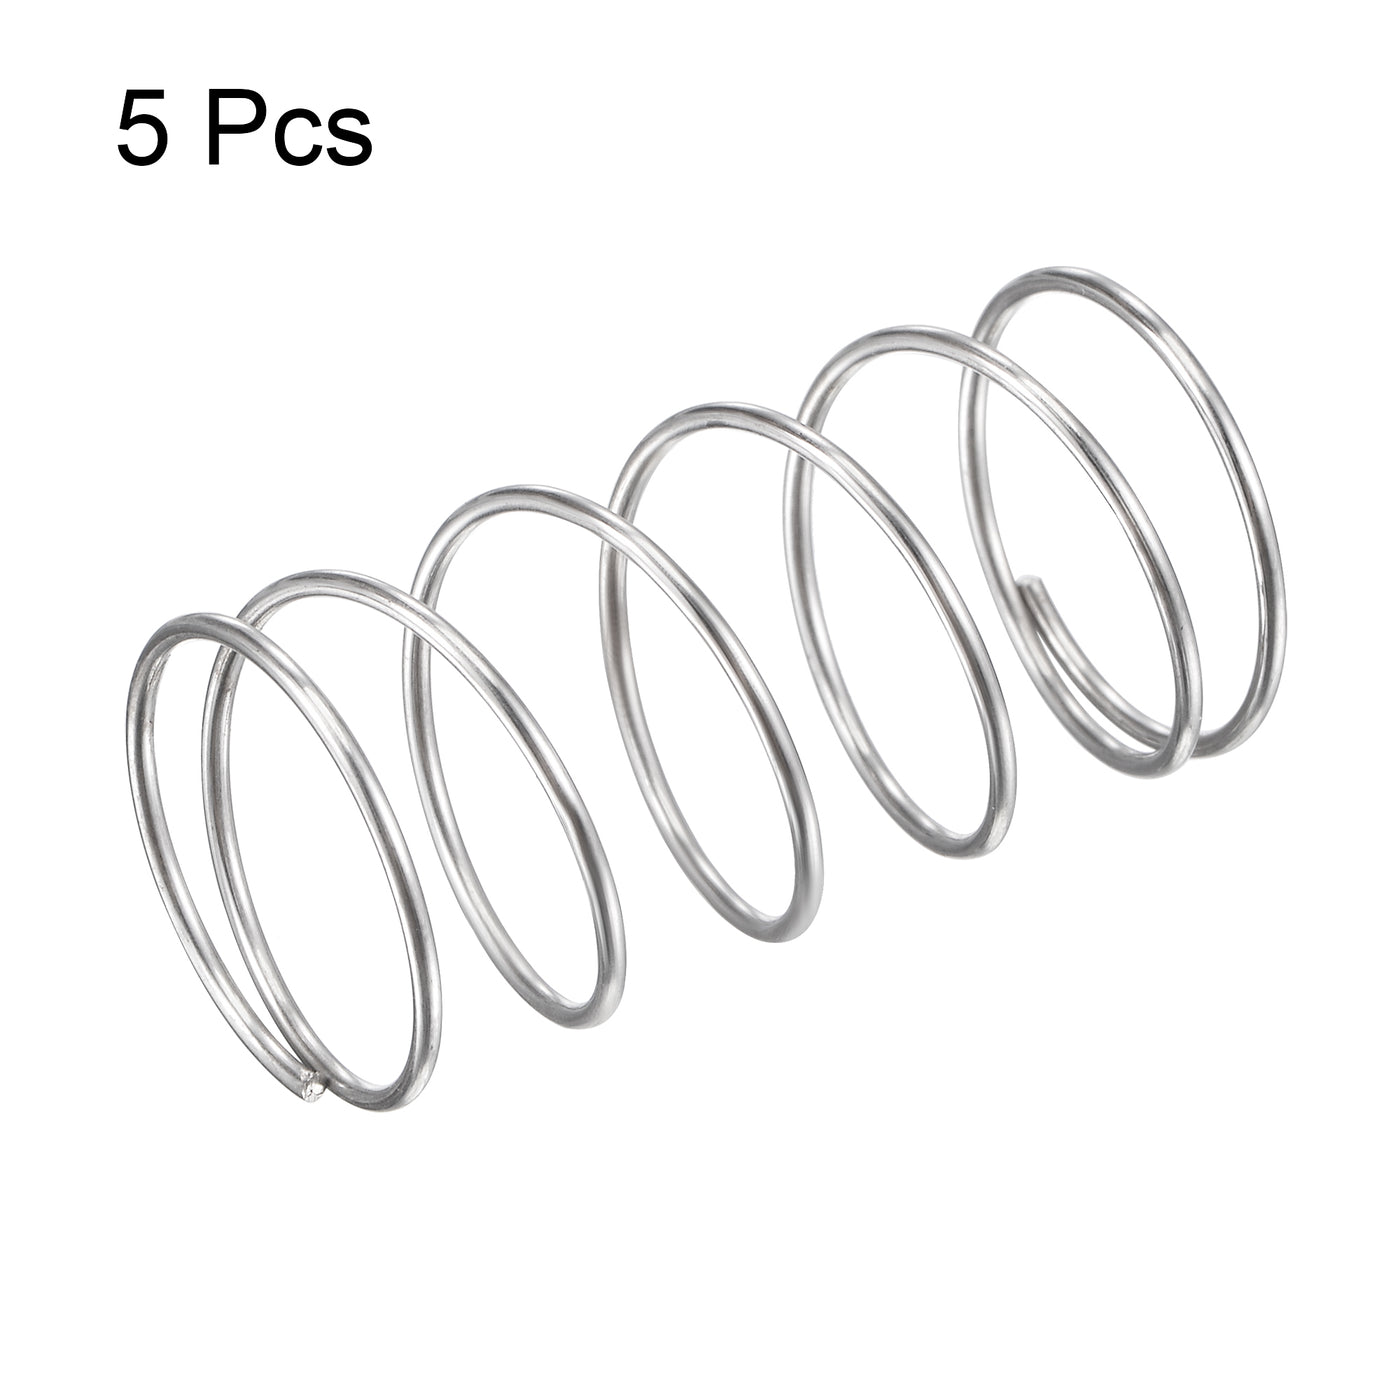 uxcell Uxcell 18mmx1mmx35mm 304 Stainless Steel Compression Spring 5.9N Load Capacity 5pcs